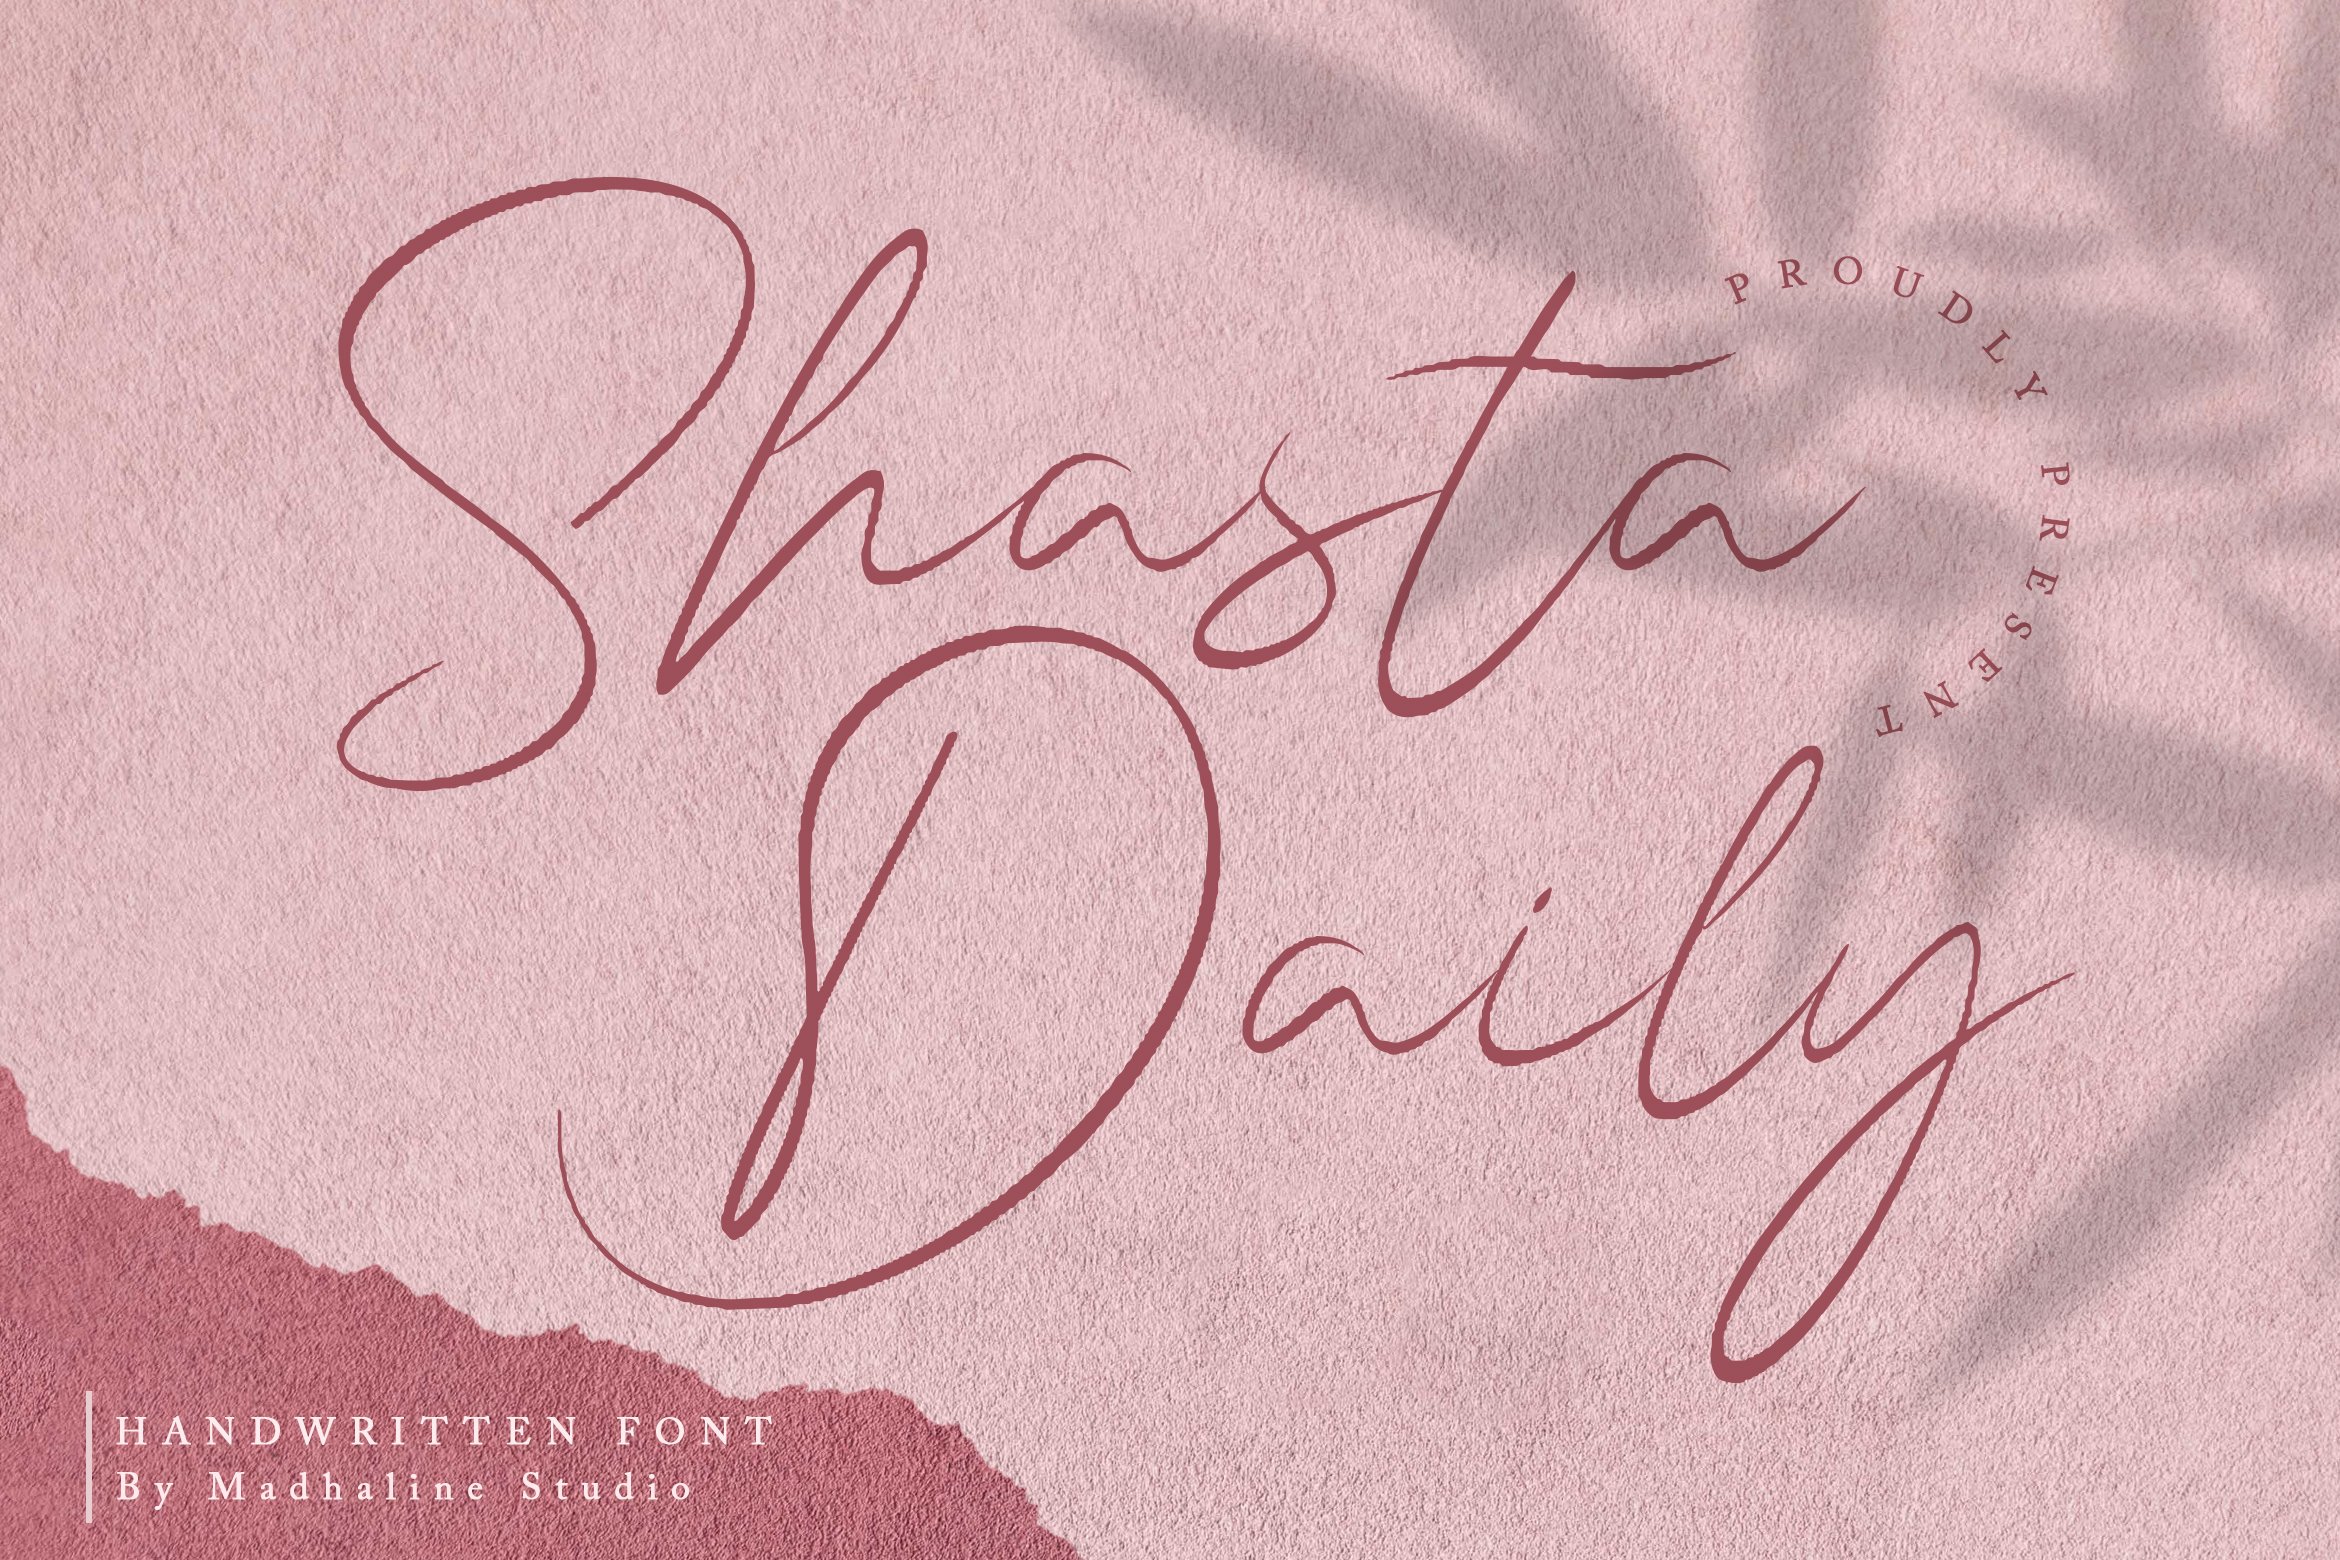 Shasta Daily | Handwritten Font cover image.